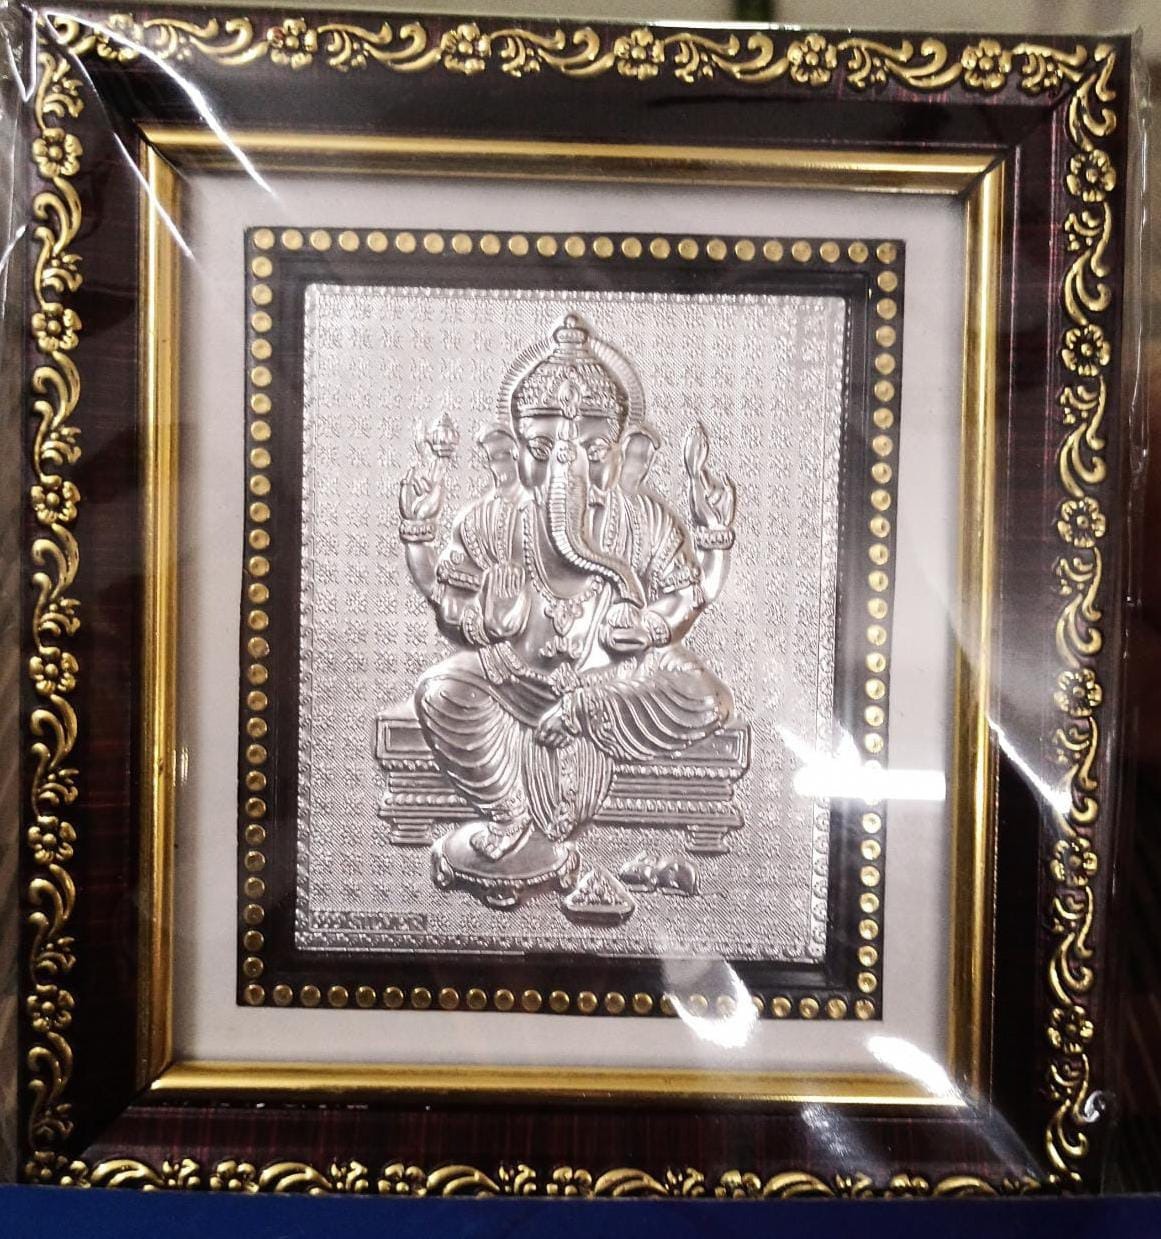 Are you looking for amazing Silver Gift Items for Diwali 2021?